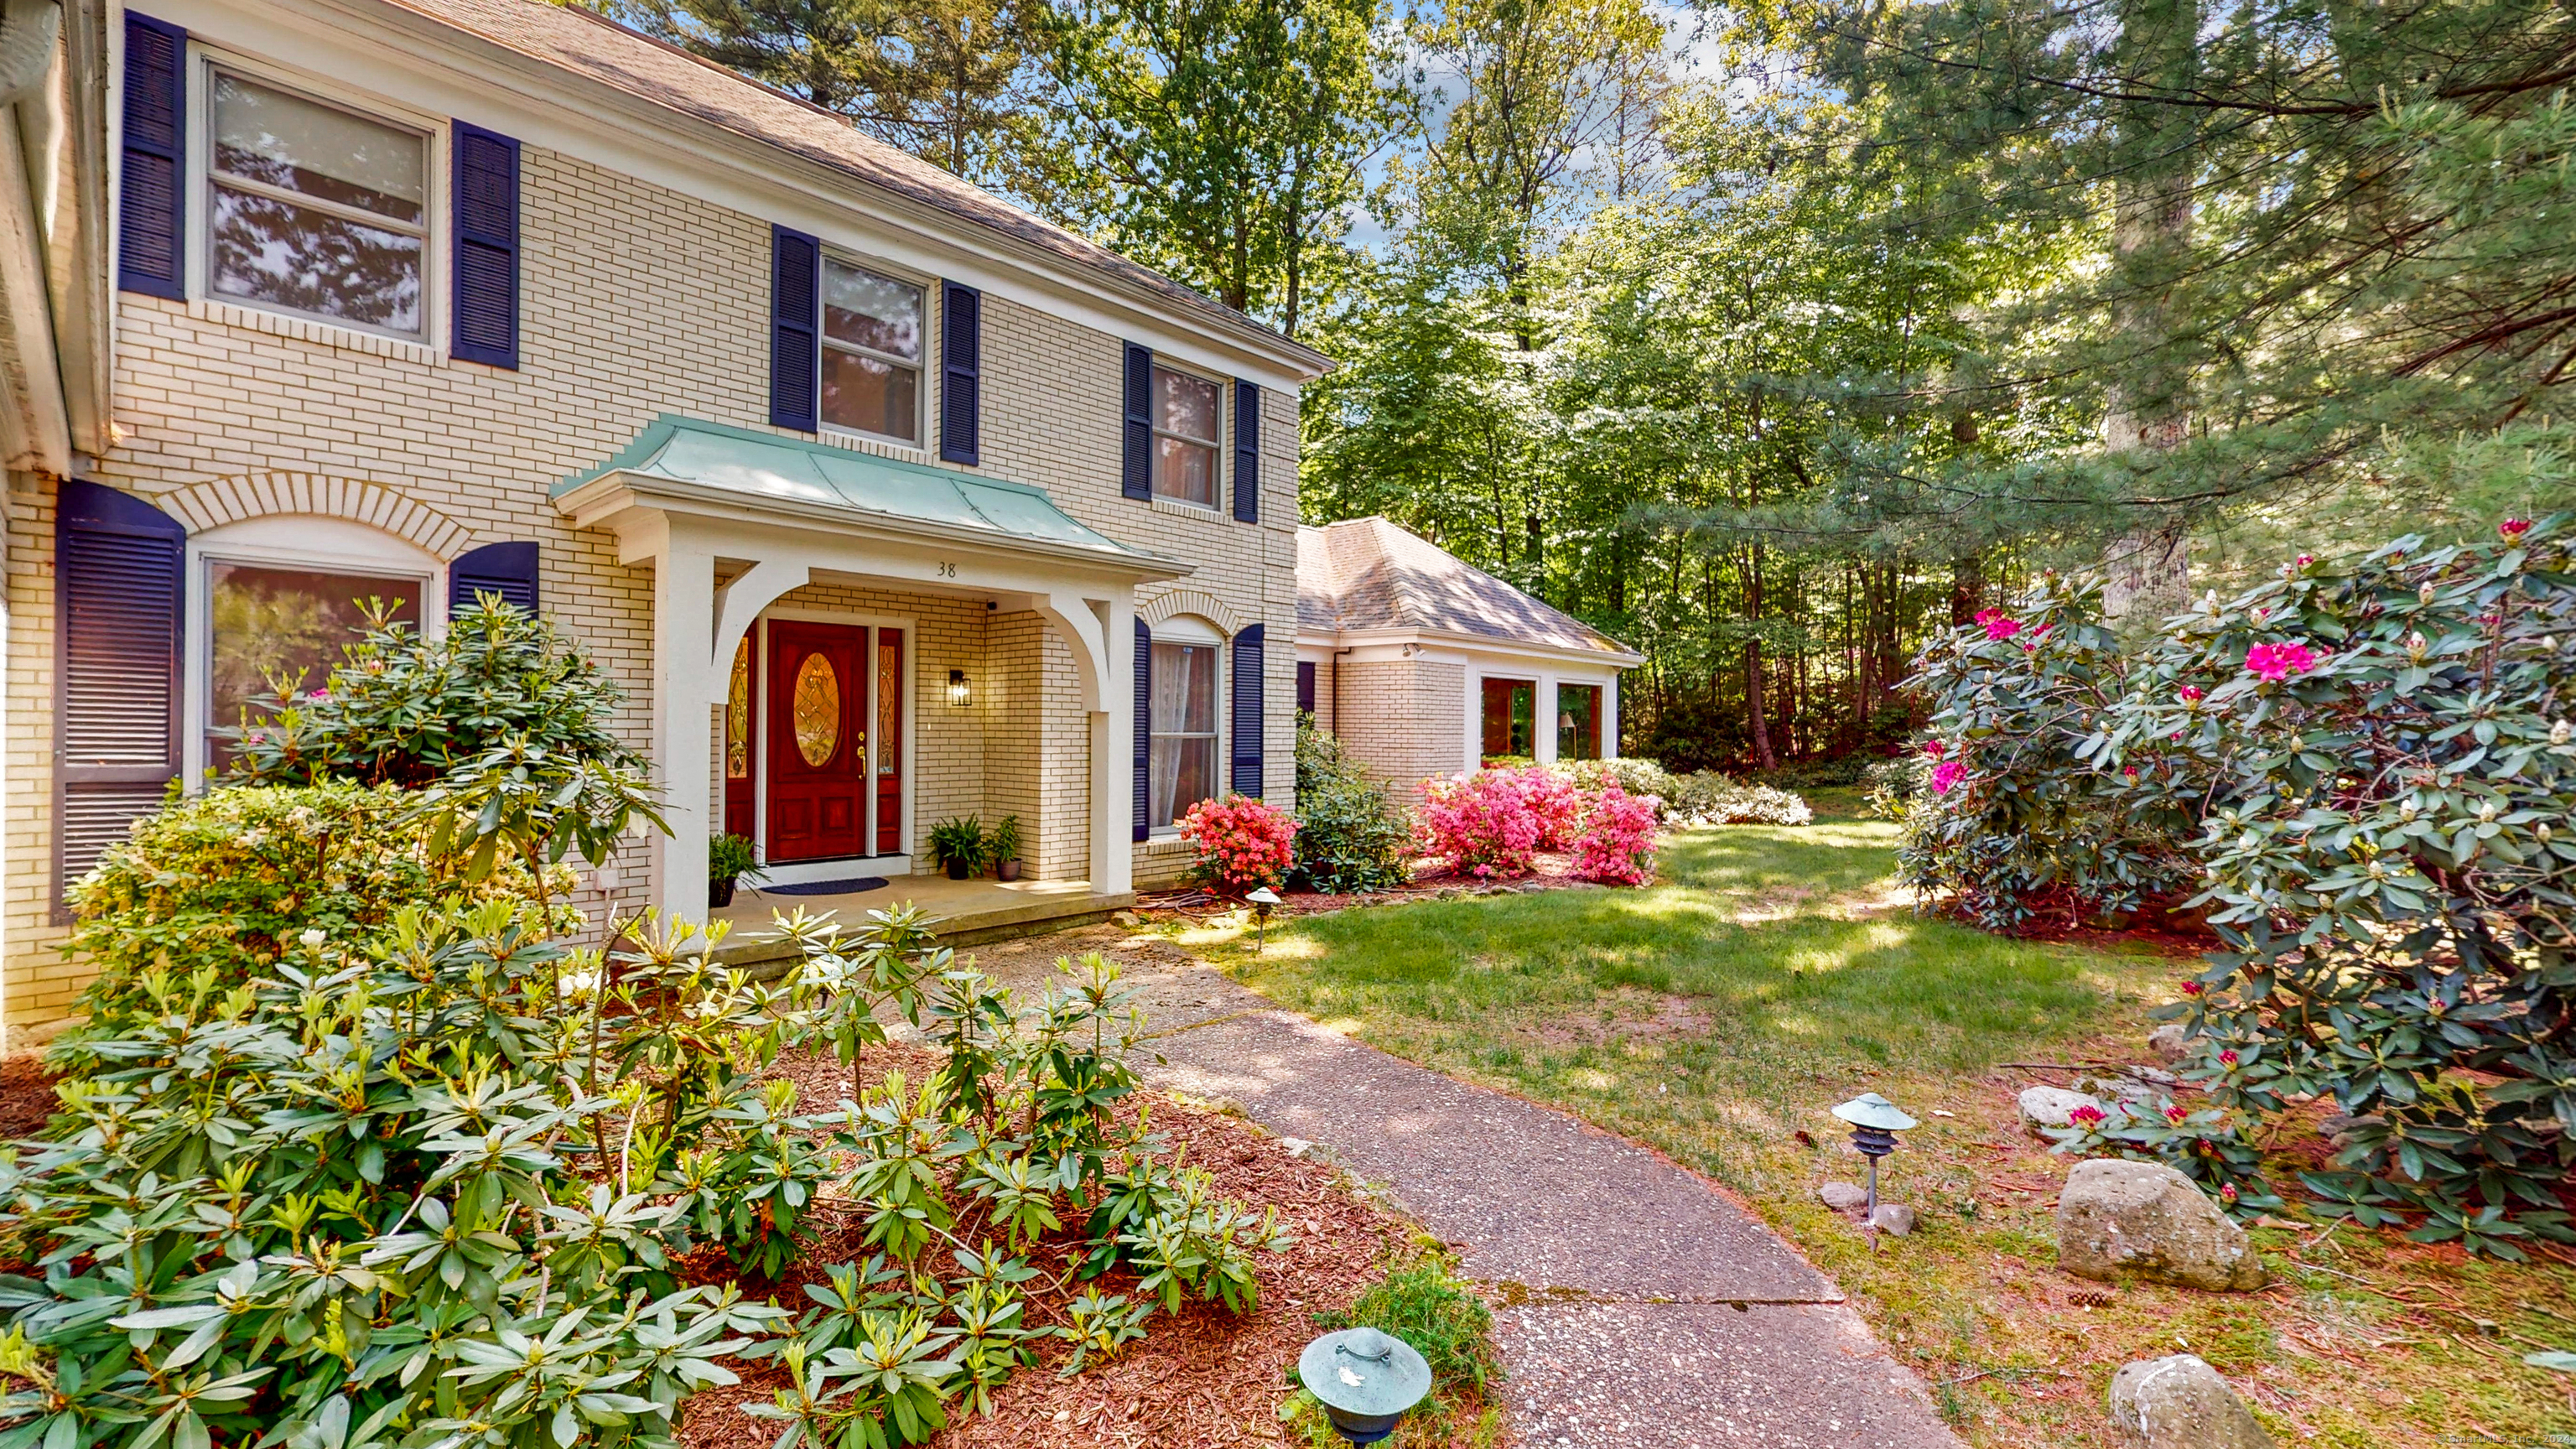 Welcome to 38 Wyngate Drive. This gracious white brick colonial is located in a serene & private setting in a sought after neighborhood in lovely Avon, CT.